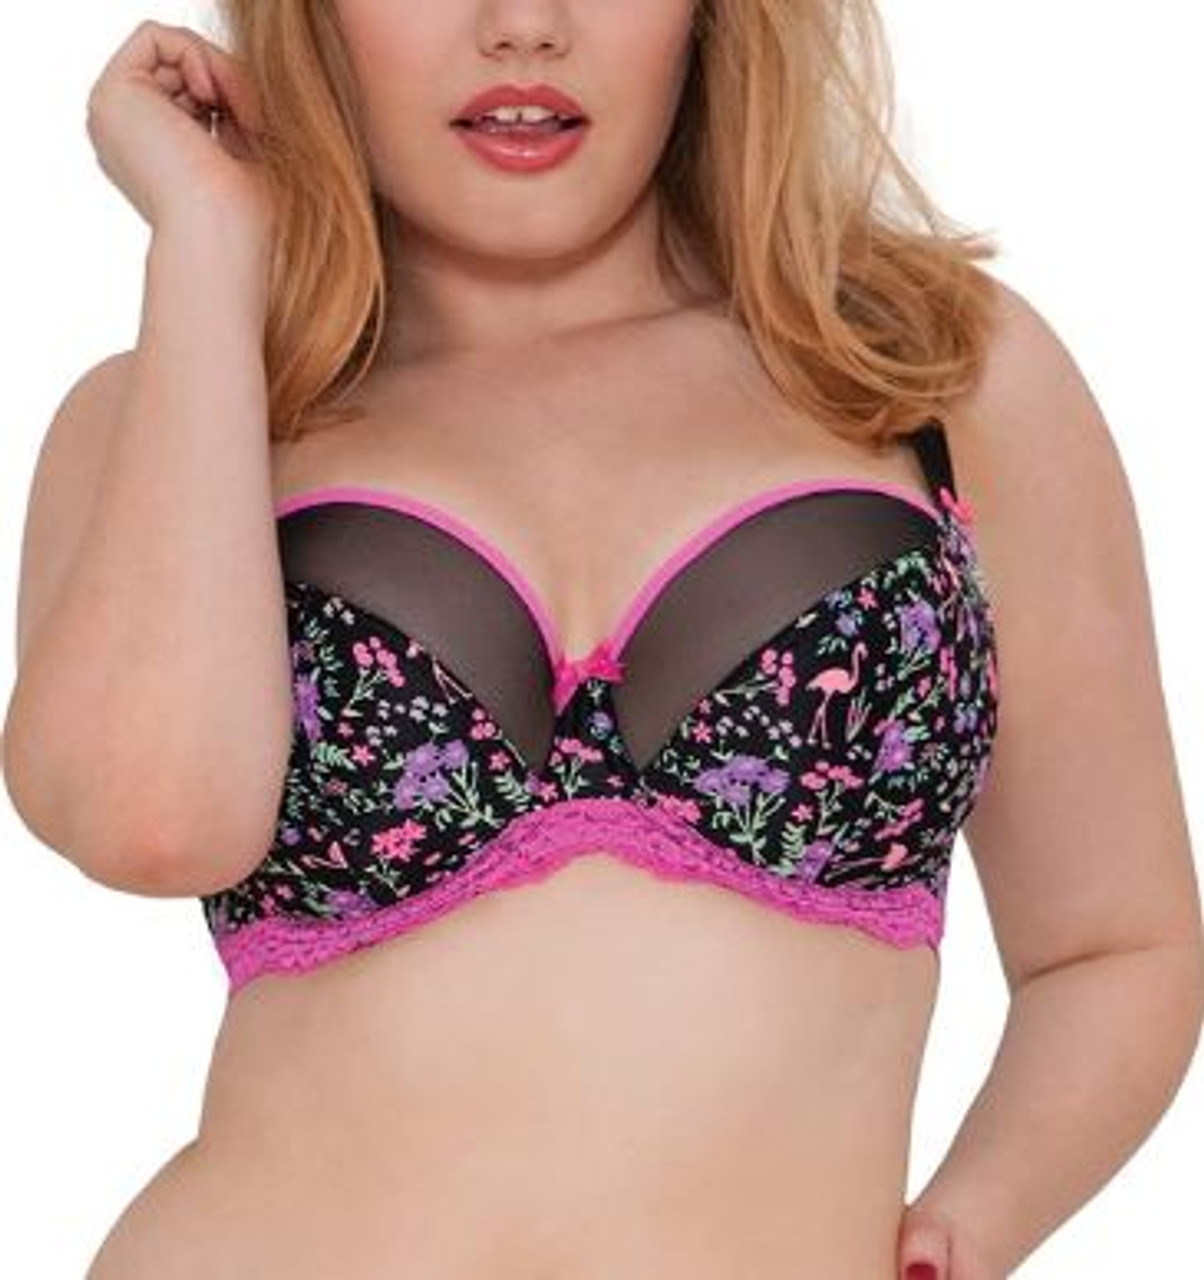 low cut plus size bra - Buy low cut plus size bra at Best Price in